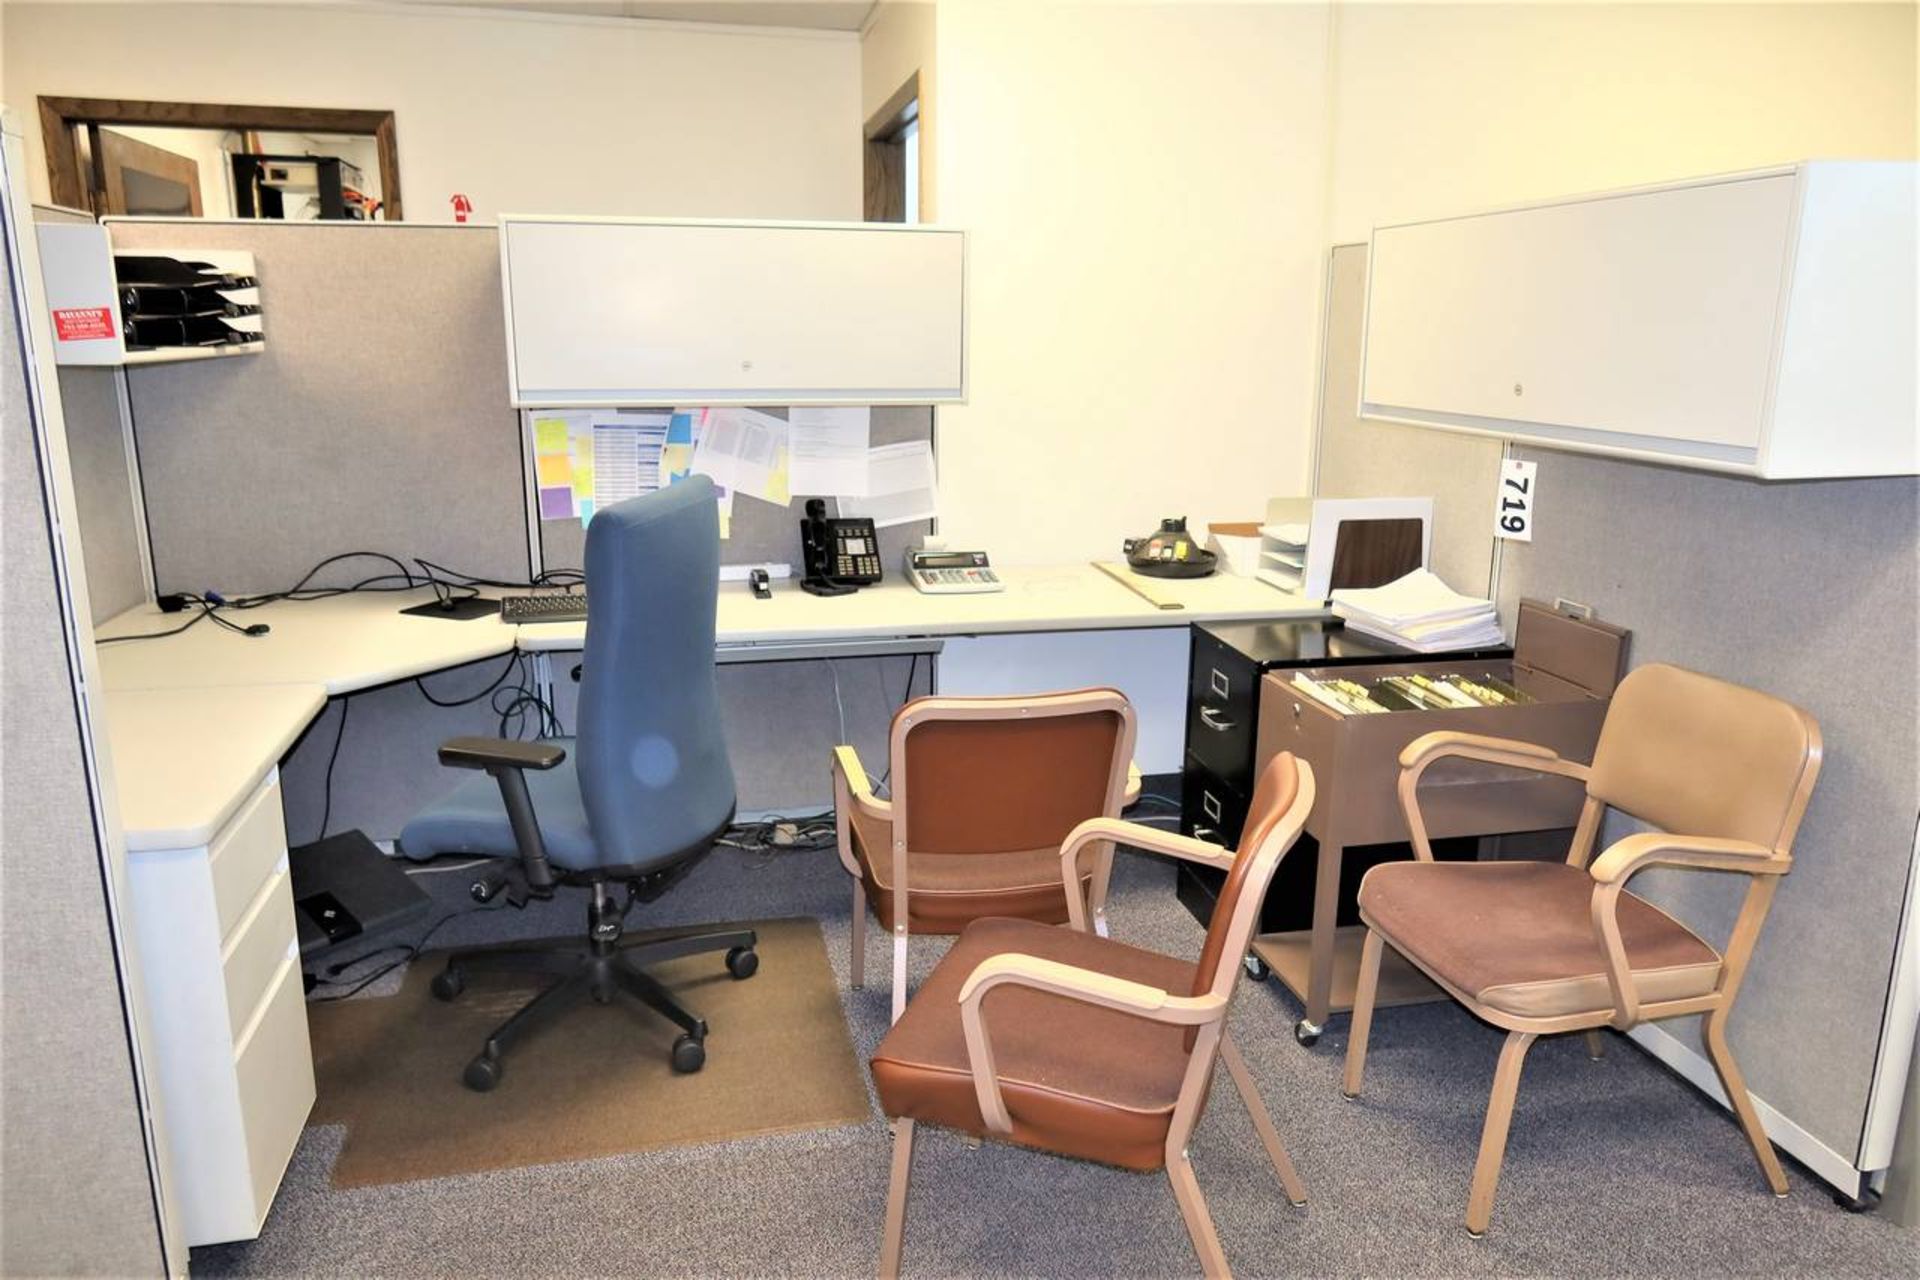 (3) Partitioned Offices With Desks,